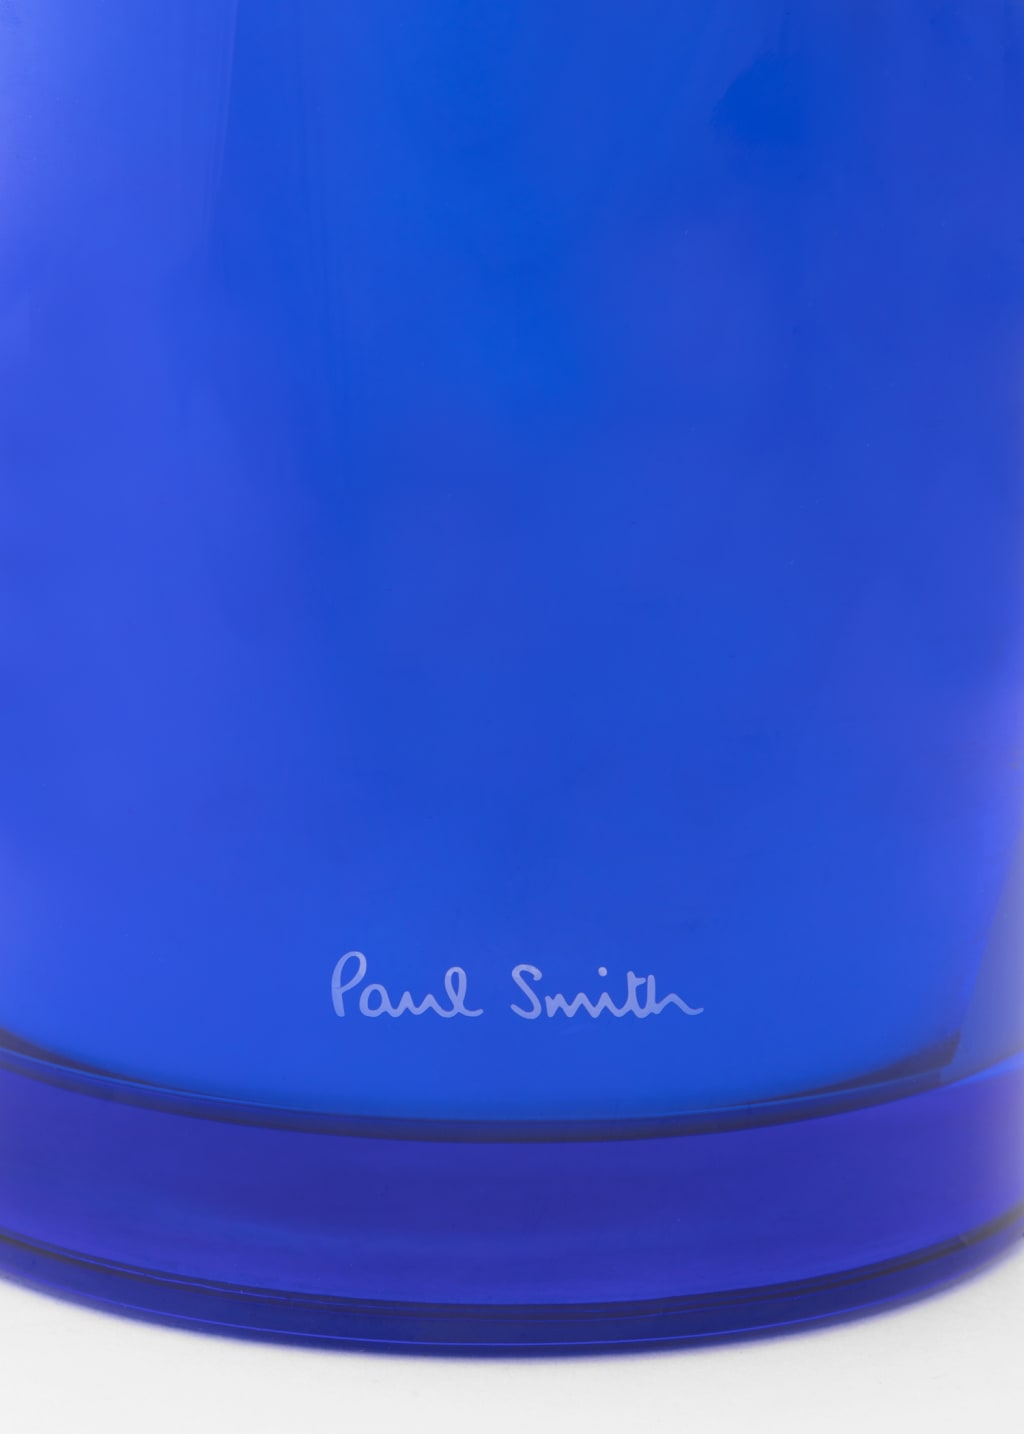 Detail View - Paul Smith Early Bird 3-Wick Scented Candle, 1000g Paul Smith